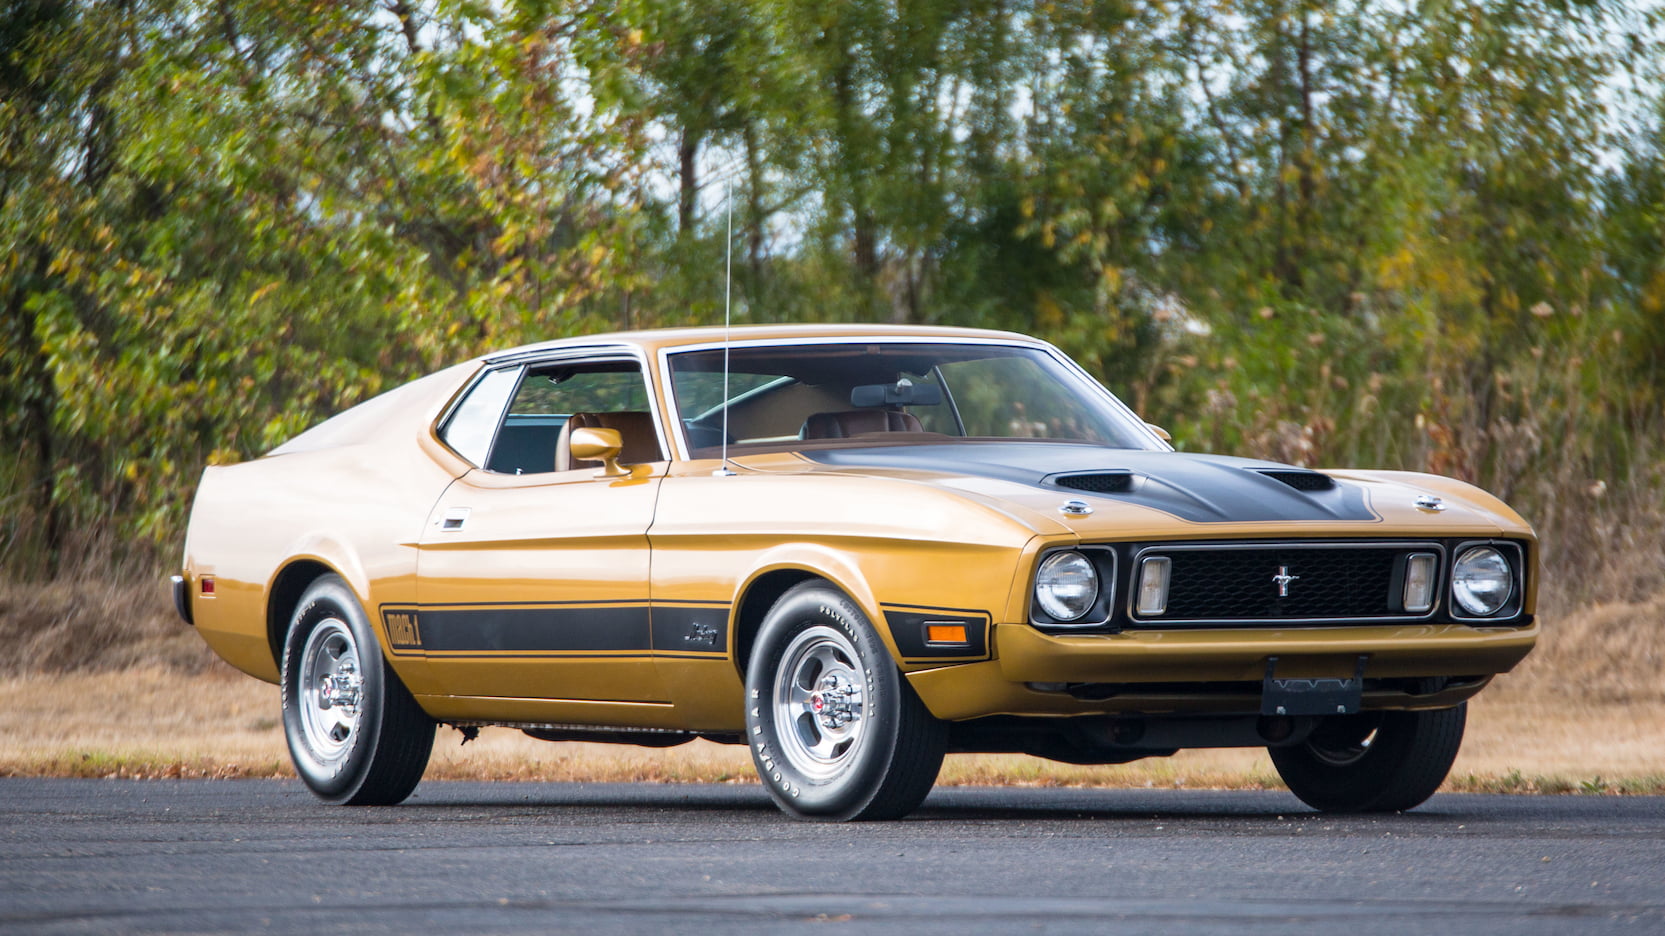 Mustang Of The Day: 1974 Ford Mustang Mach 1